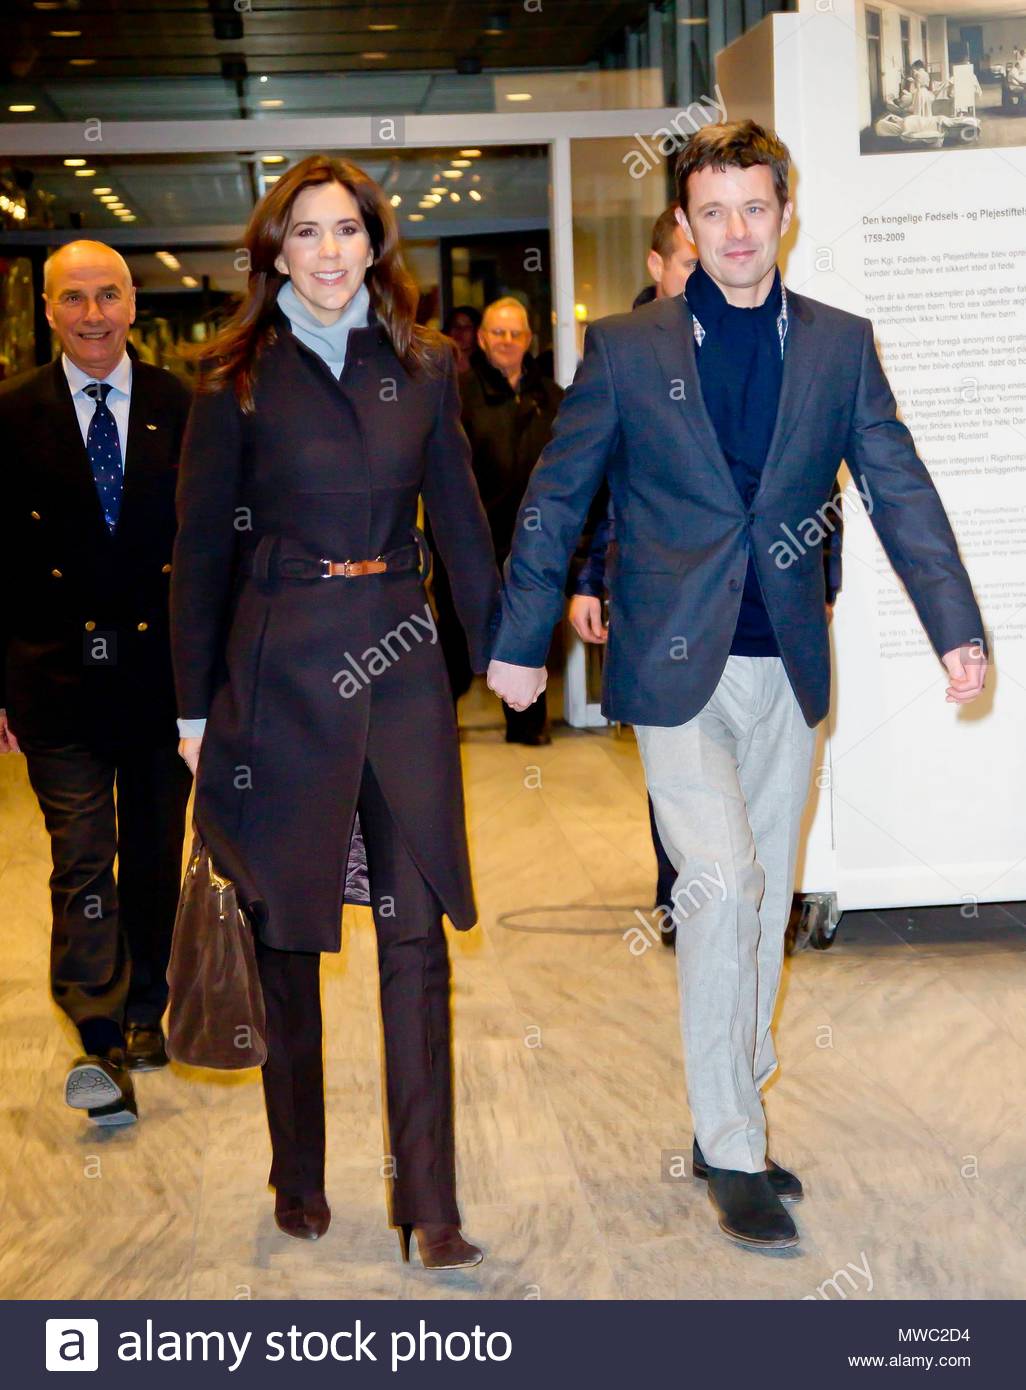 crown-princess-mary-crown-prince-frederik-hrh-crown-princess-mary-hrh-crown-prince-frederik-hm-queen-margrethe-and-hrh-prince-henrik-arrive-at-rigshospitalet-in-copenhagen-the-newborn-princess-and-her-mother-hrh-princess-marie-of-denmark-prince-joachim-arrives-with-his-sons-prince-henrik-prince-nikolai-and-prince-felix-to-see-their-new-sister-prince-joachin-is-pictured-securing-prince-henrik-into-the-car-photo-claus-poulsen-all-over-press-denmark-as-MWC2D4.jpg